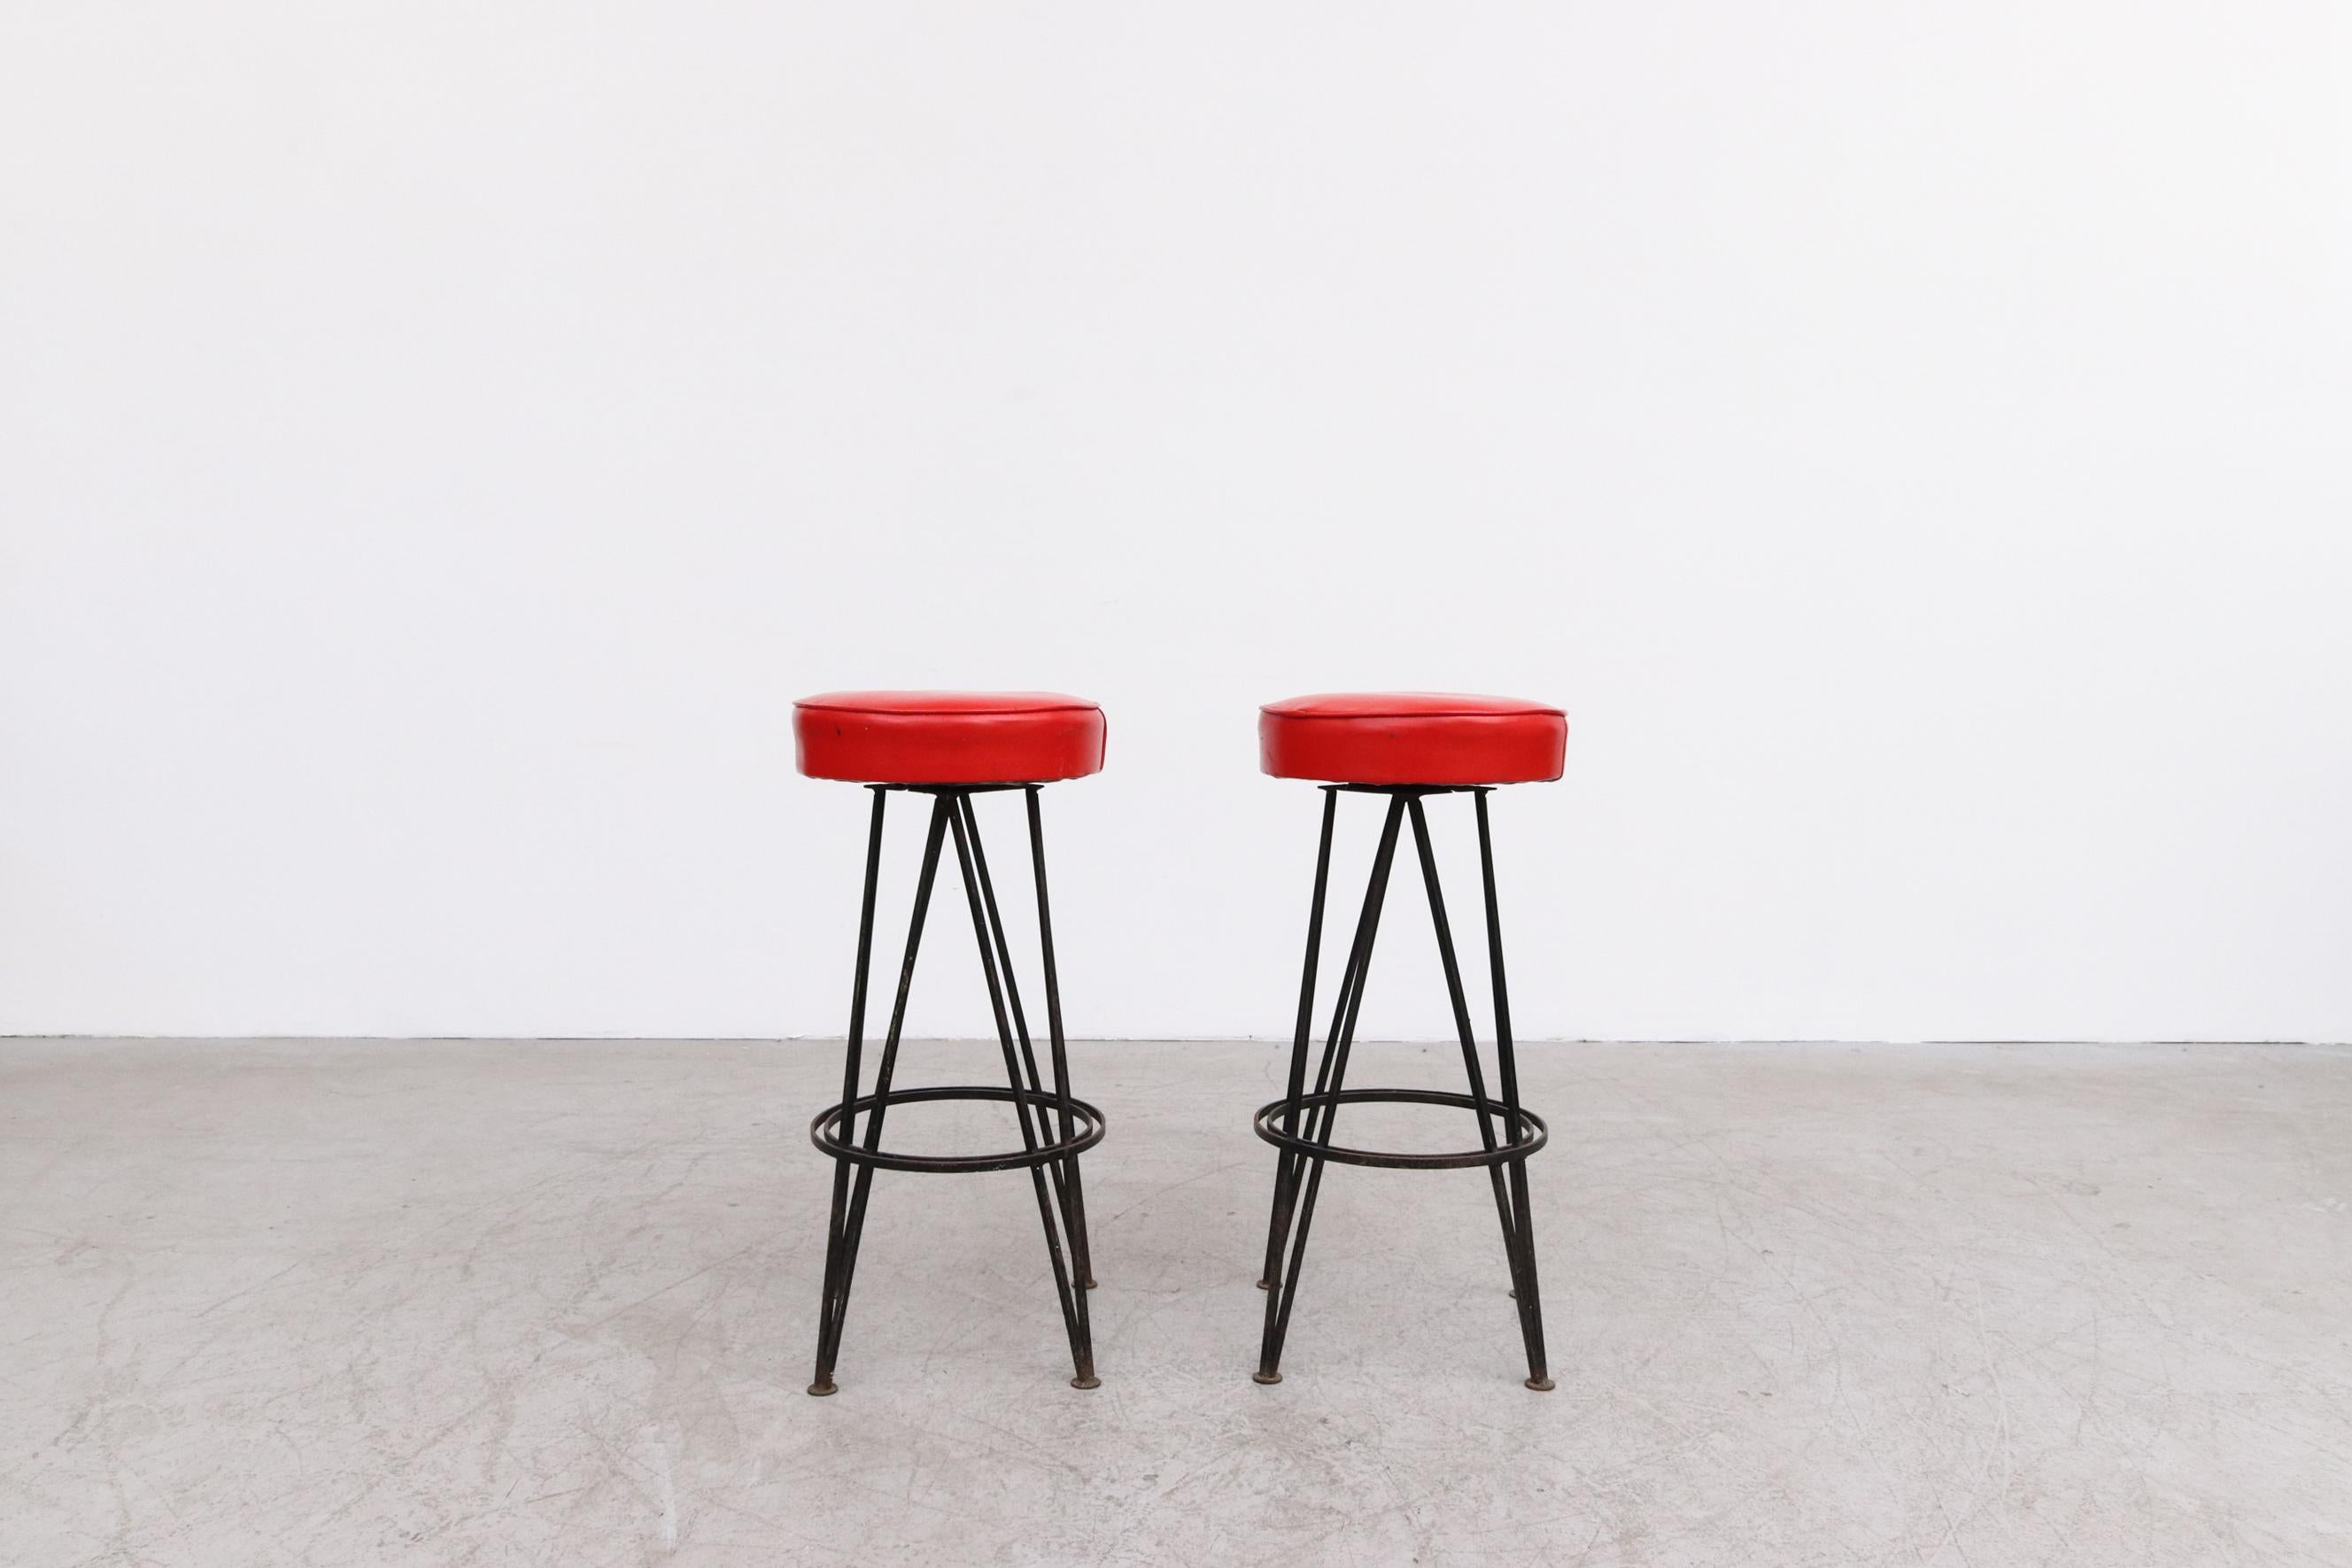 Pair of Retro 50's Bar Stools with Rotating Red Skai Seats and Black Enameled Legs. In original condition with visible wear to seats and frame. Wear is consistent with their age and use. Set Price.